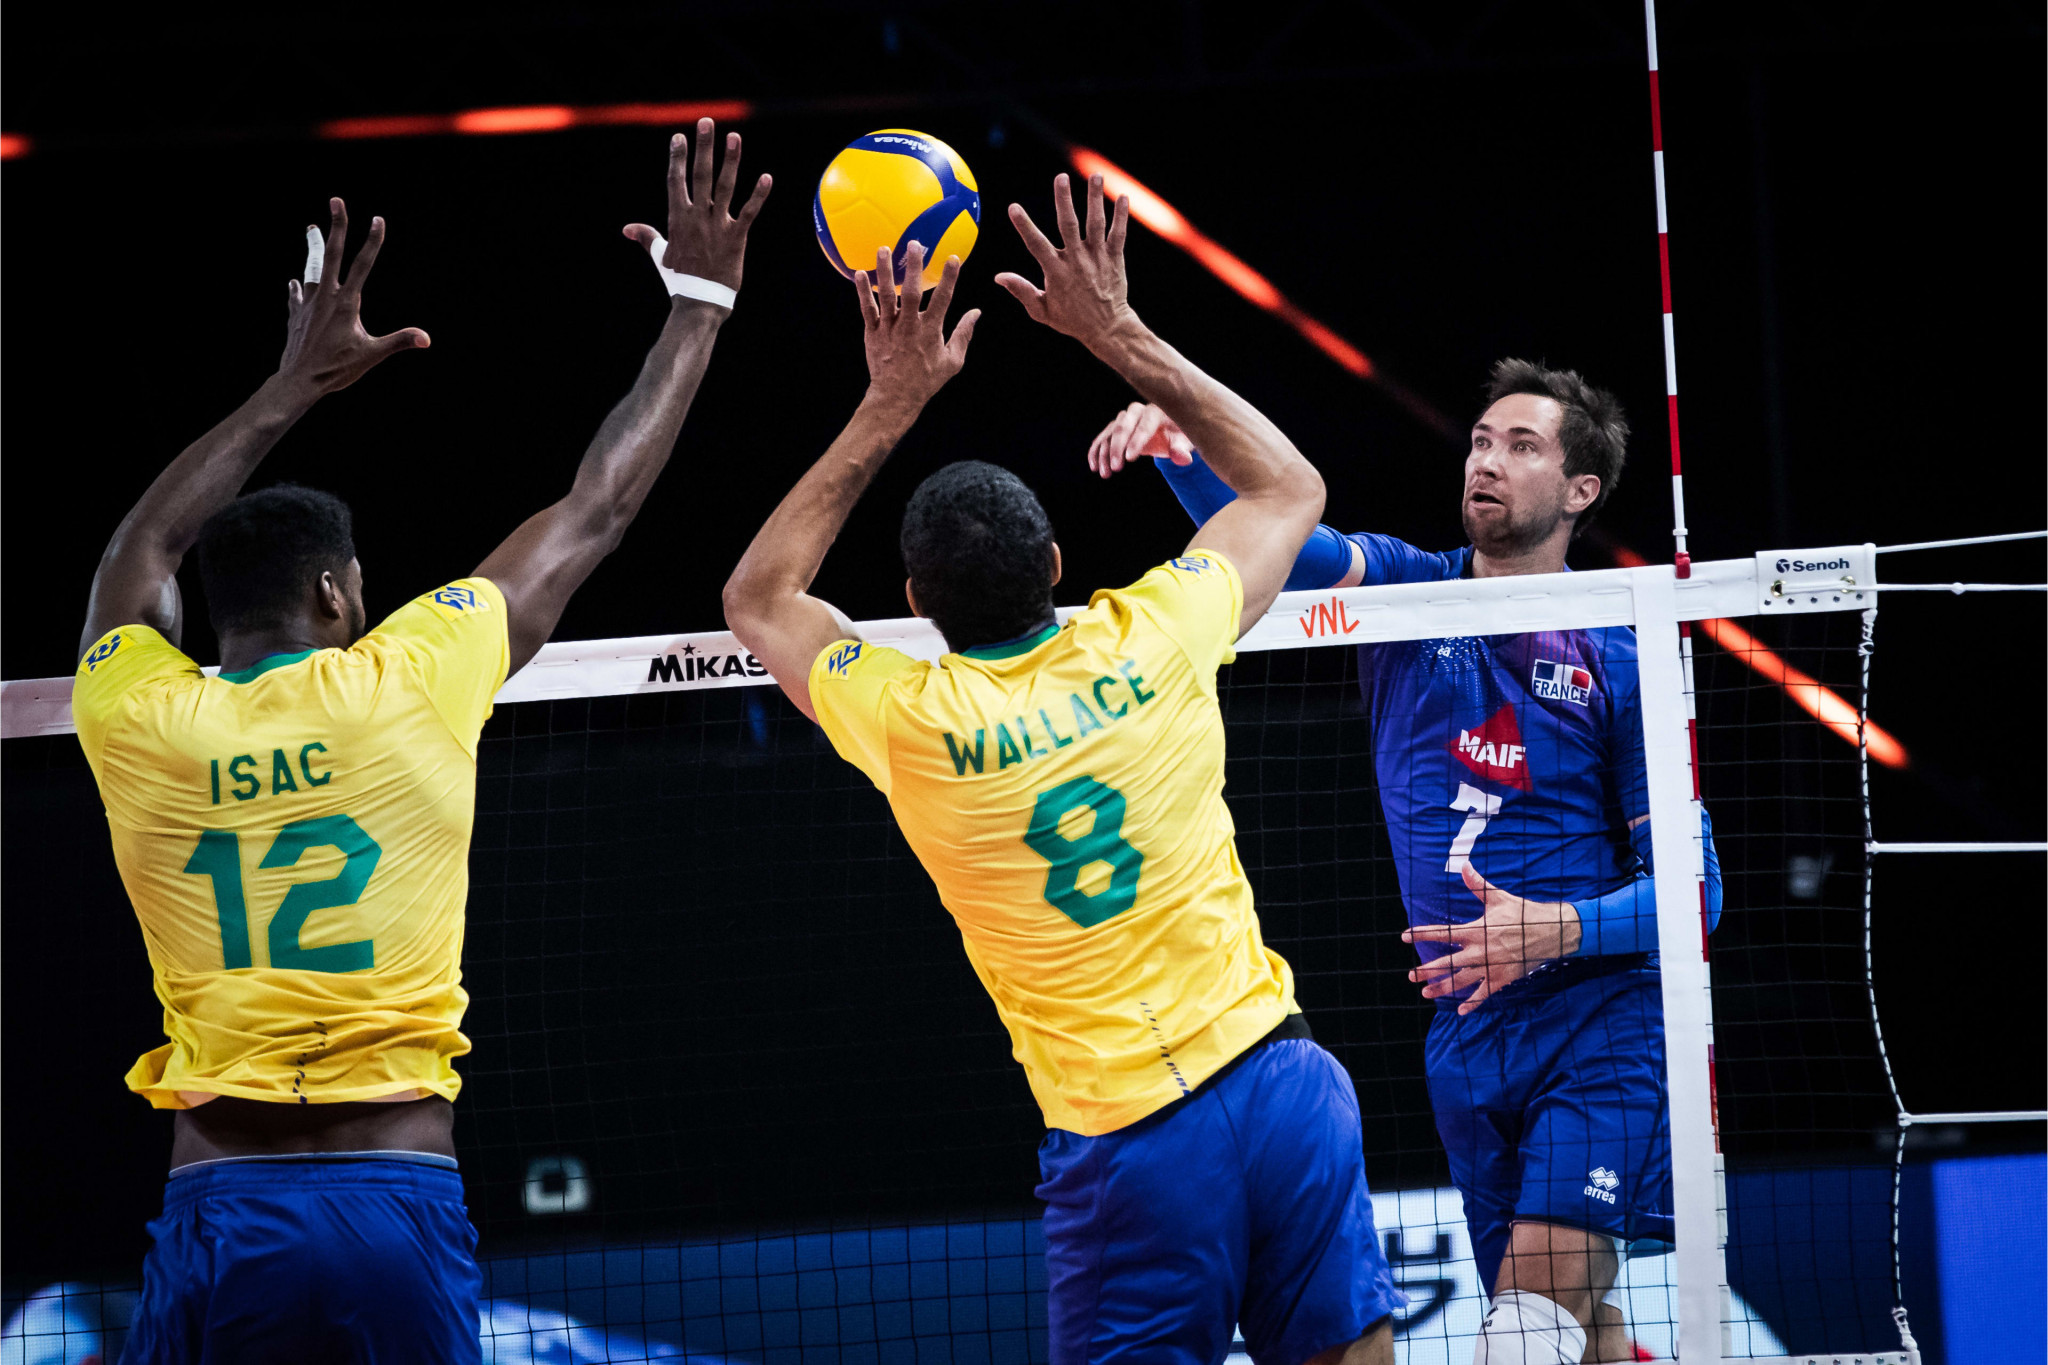 Brazil lead men’s Volleyball Nations League after third week of matches